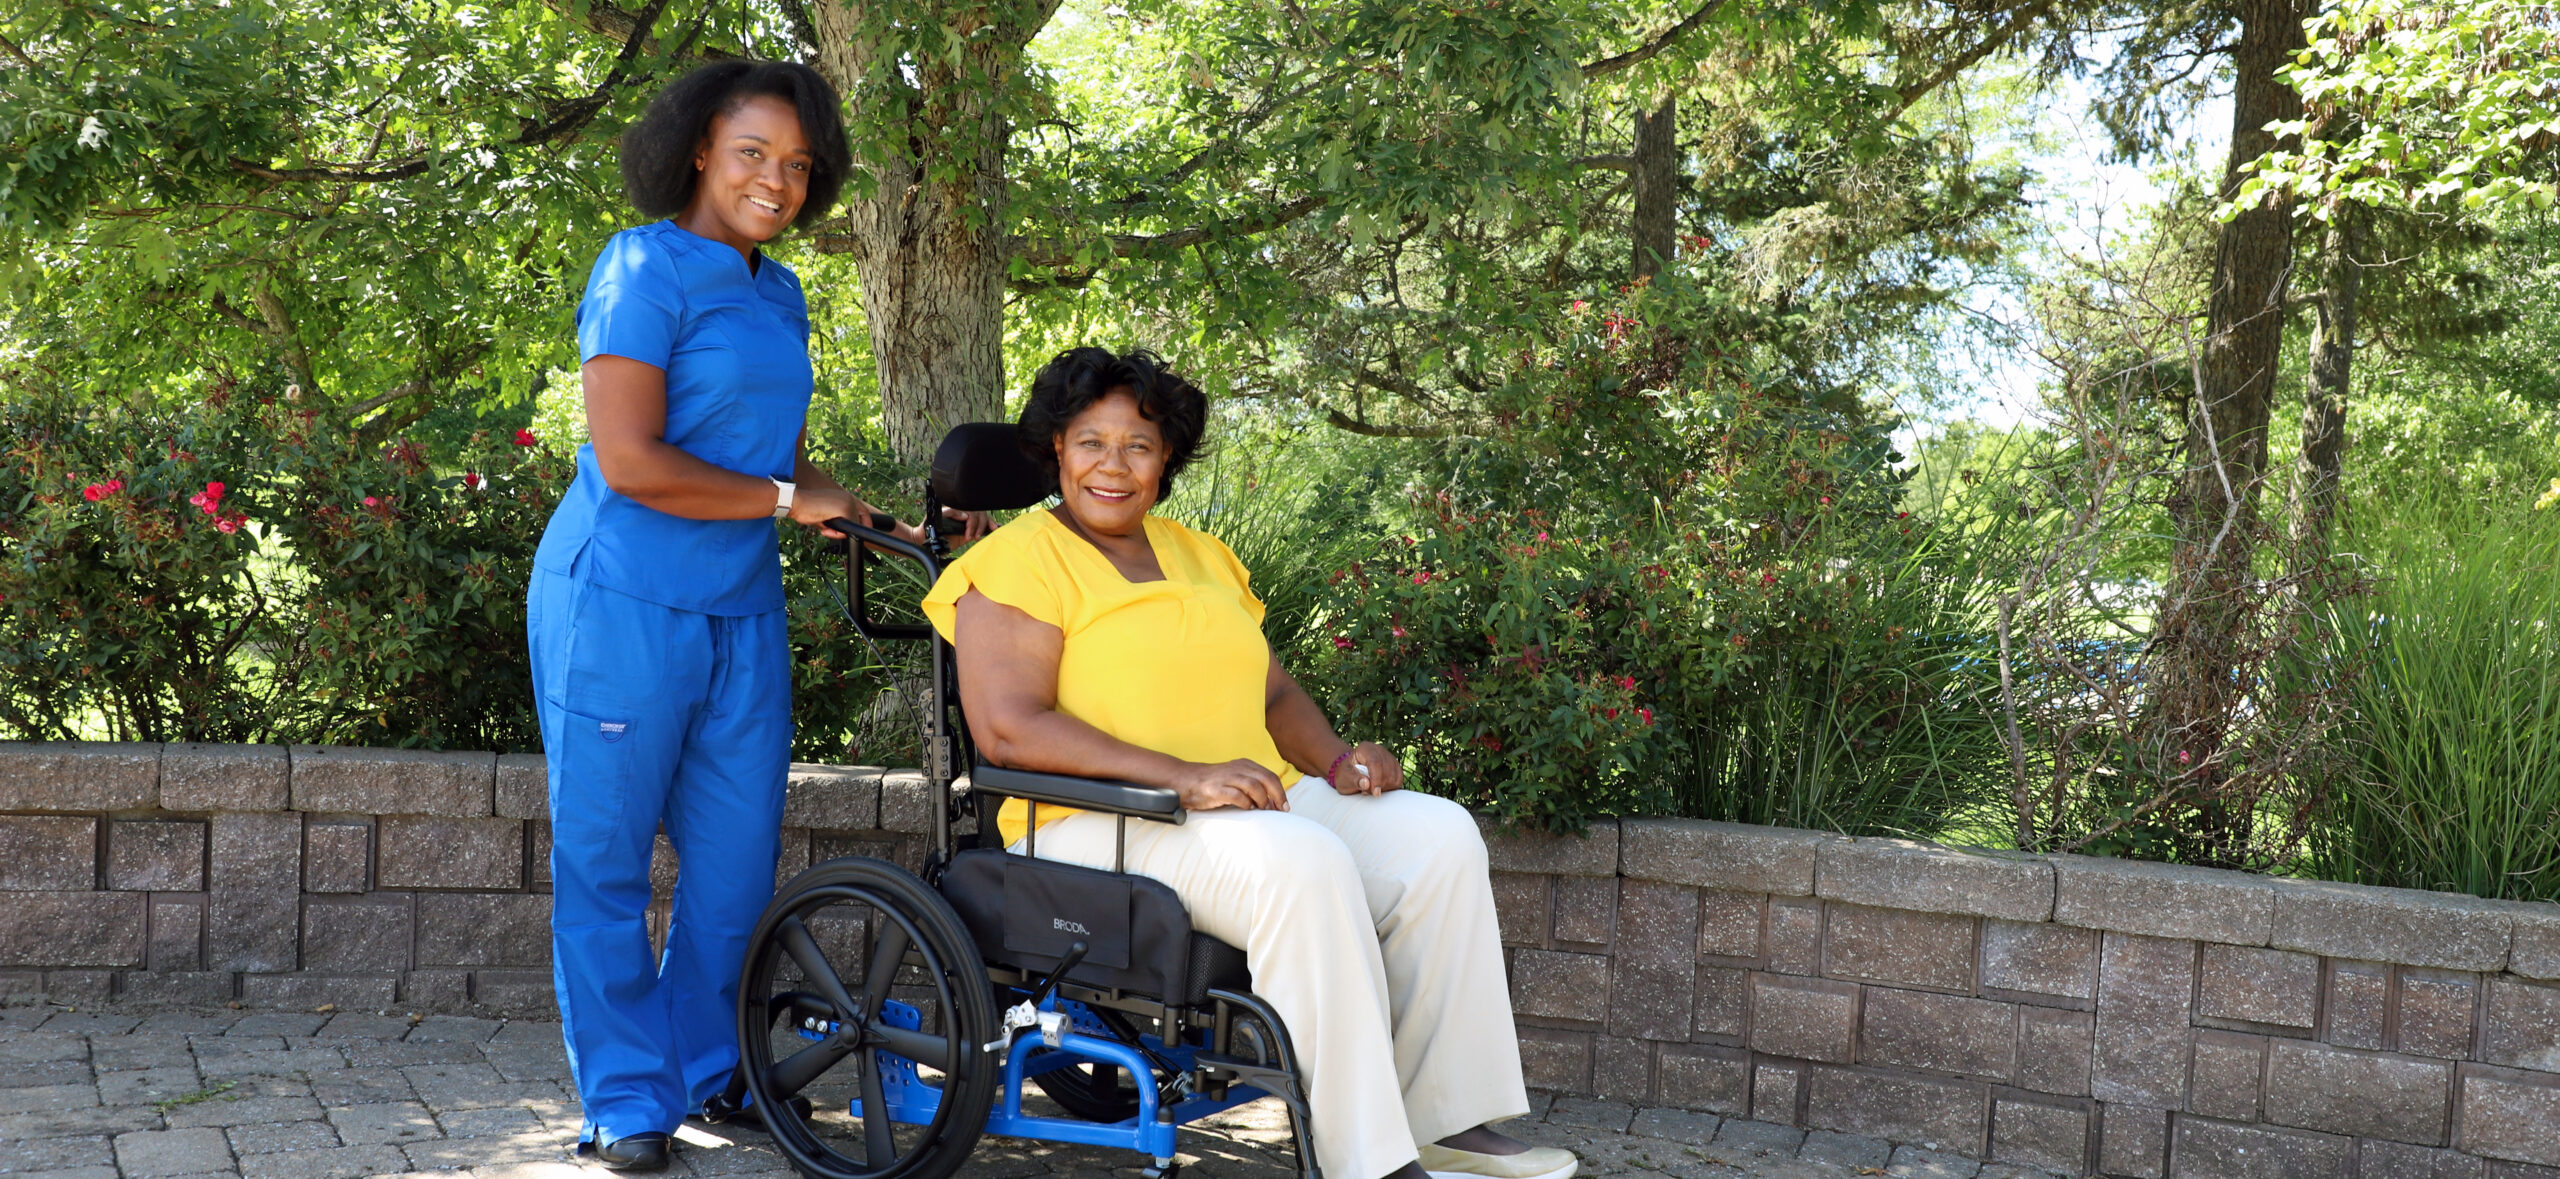 Hospice Nurse Standing Behind a Patient in a Broda Wheelchair